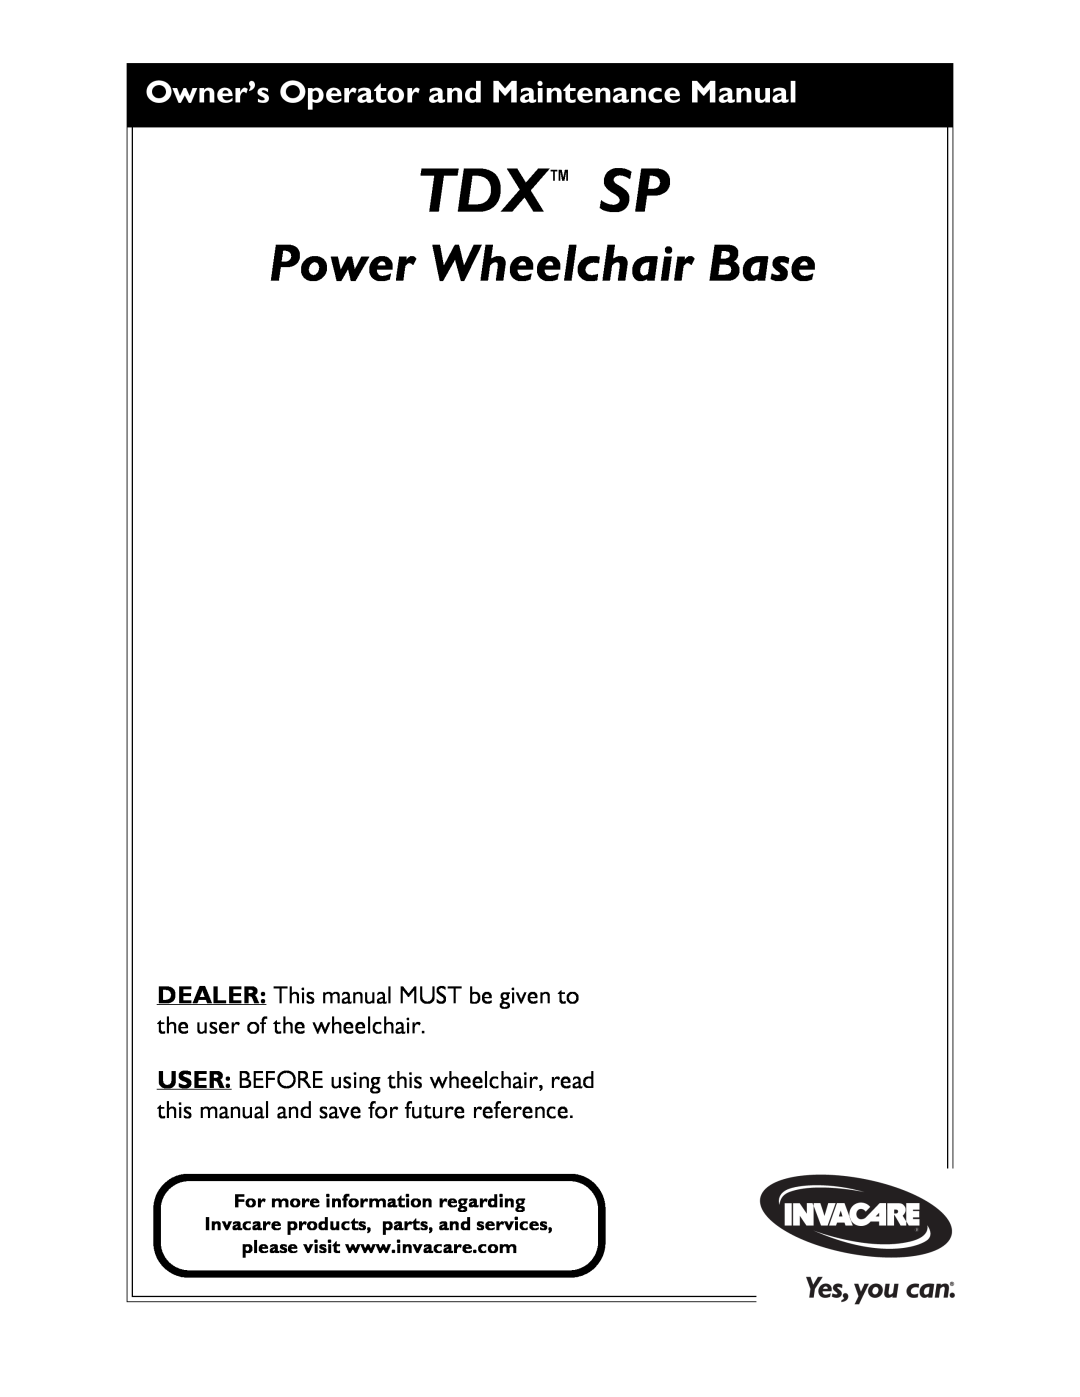 Invacare SP manual Tdx Sp, Power Wheelchair Base, Owner’s Operator and Maintenance Manual 